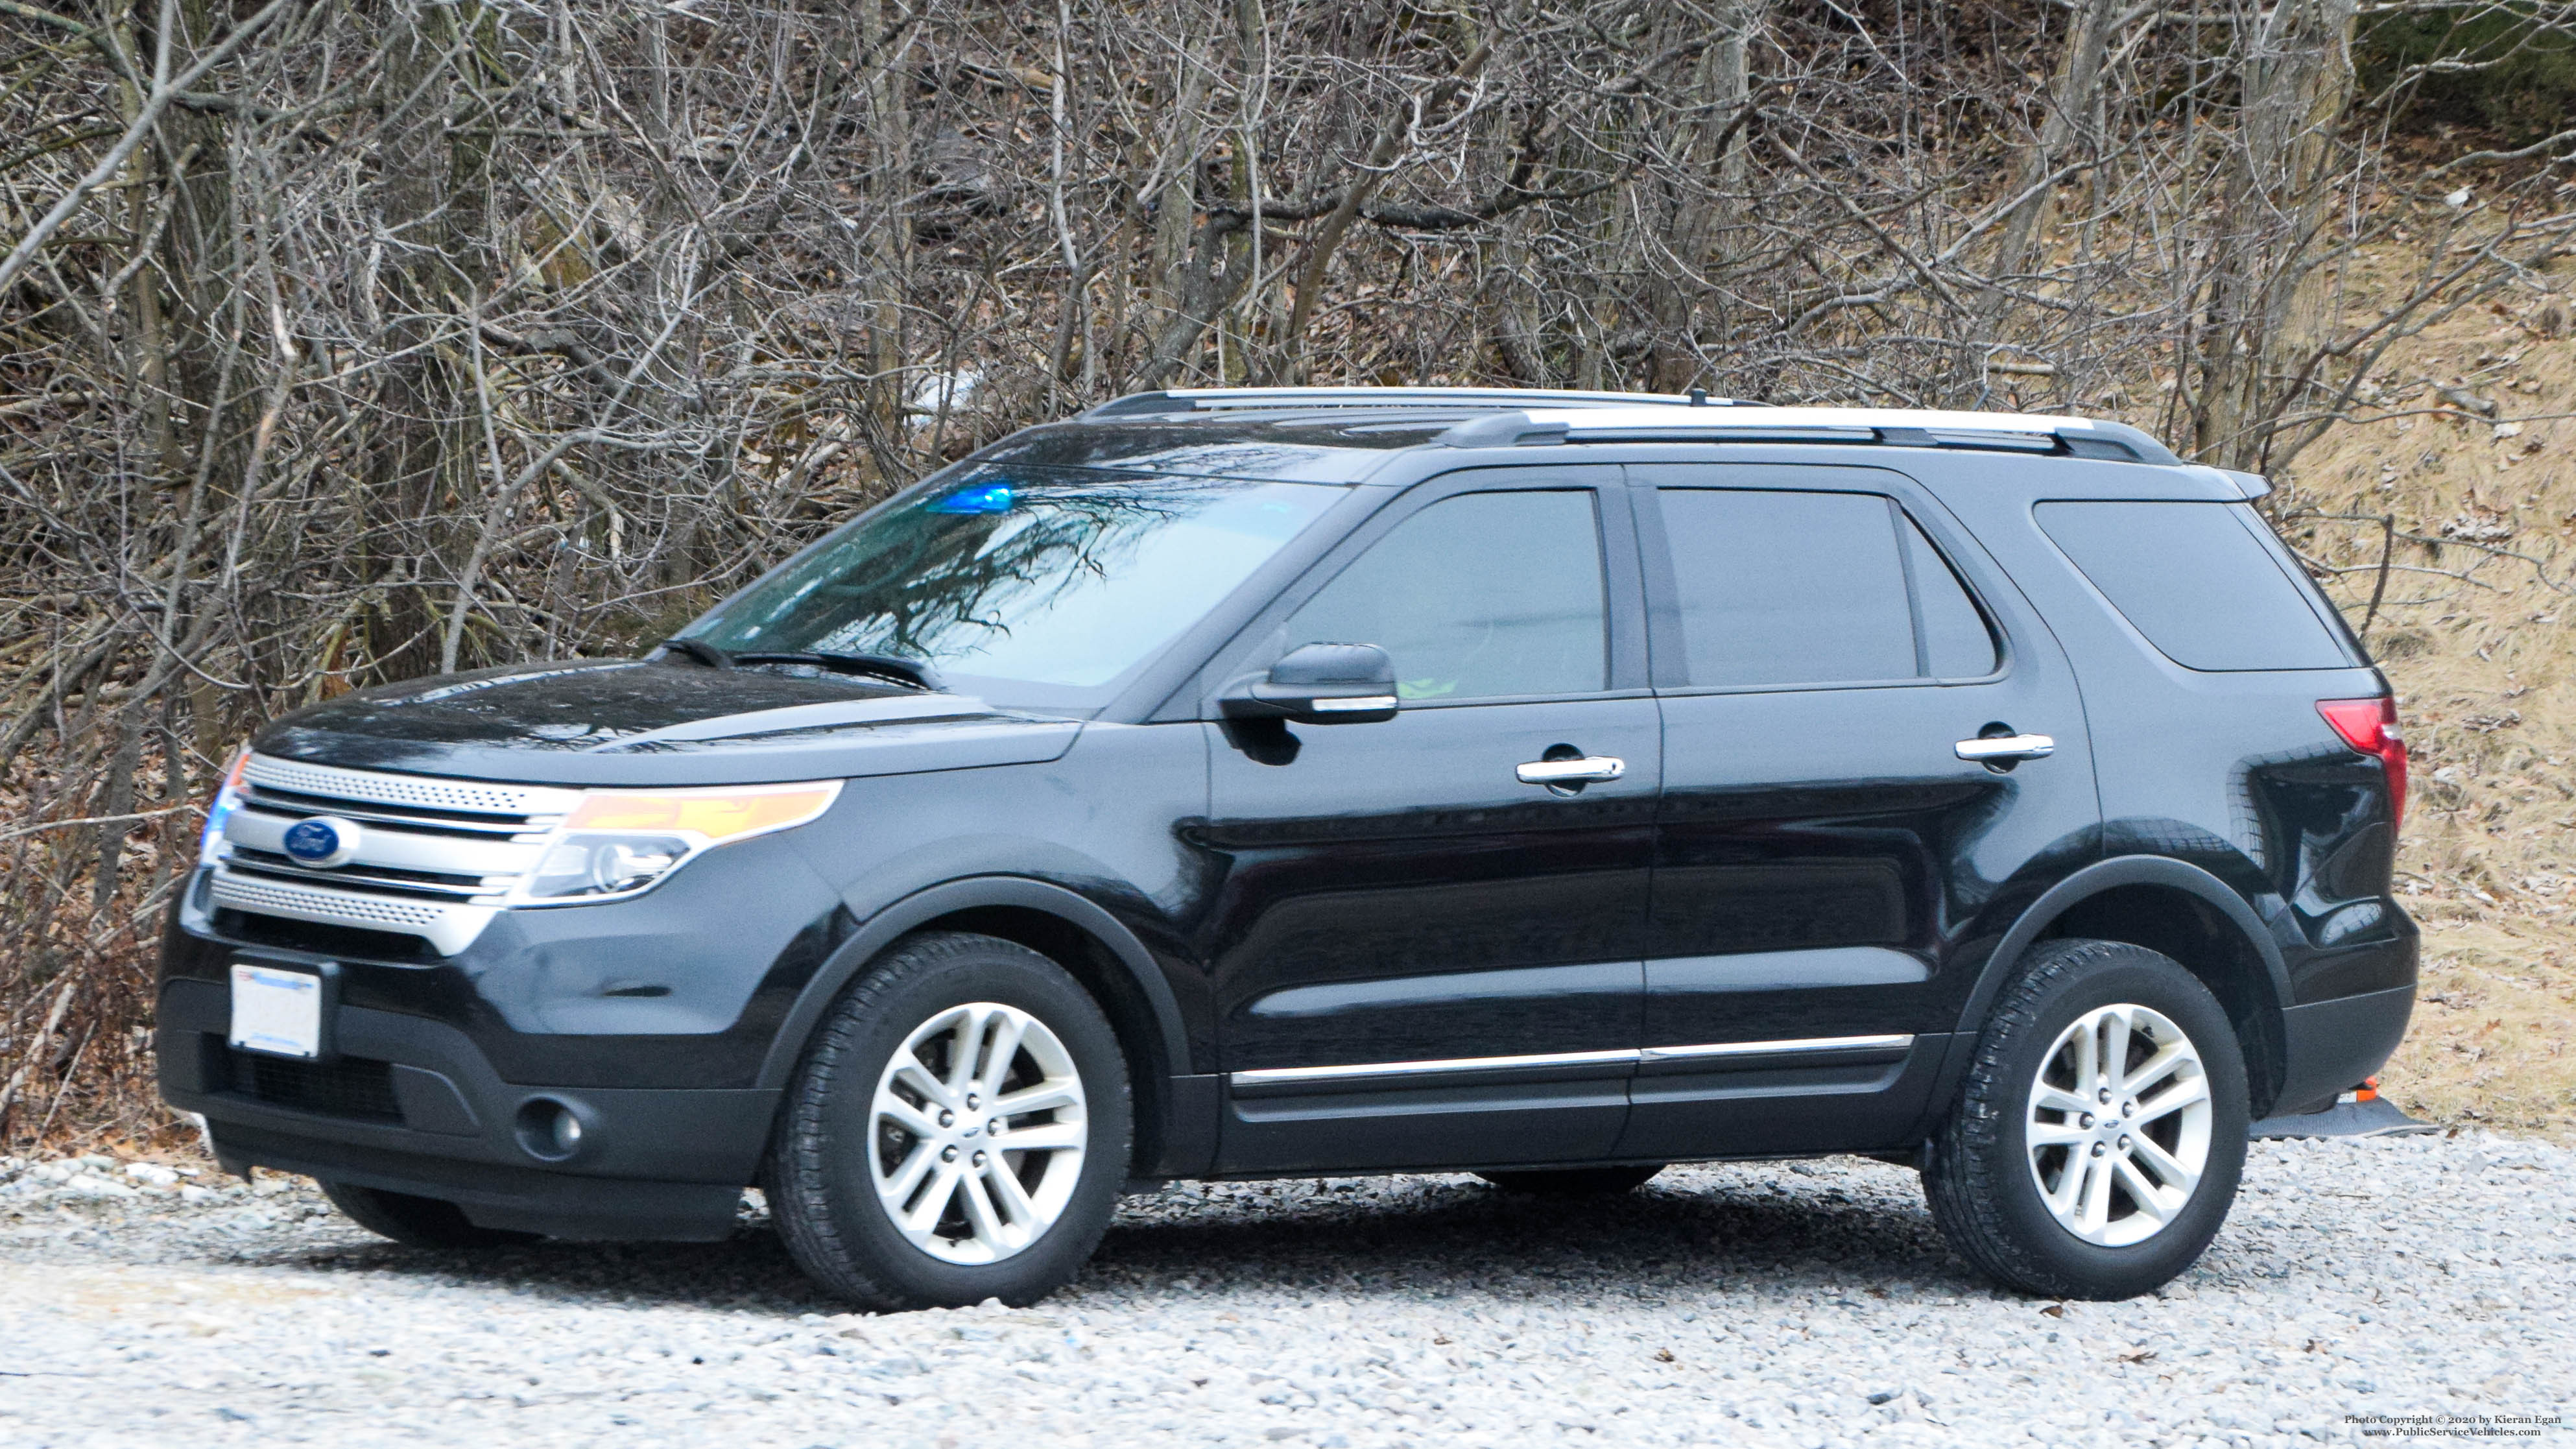 A photo  of Massachusetts State Police
            Unmarked Unit, a 2013-2015 Ford Explorer             taken by Kieran Egan